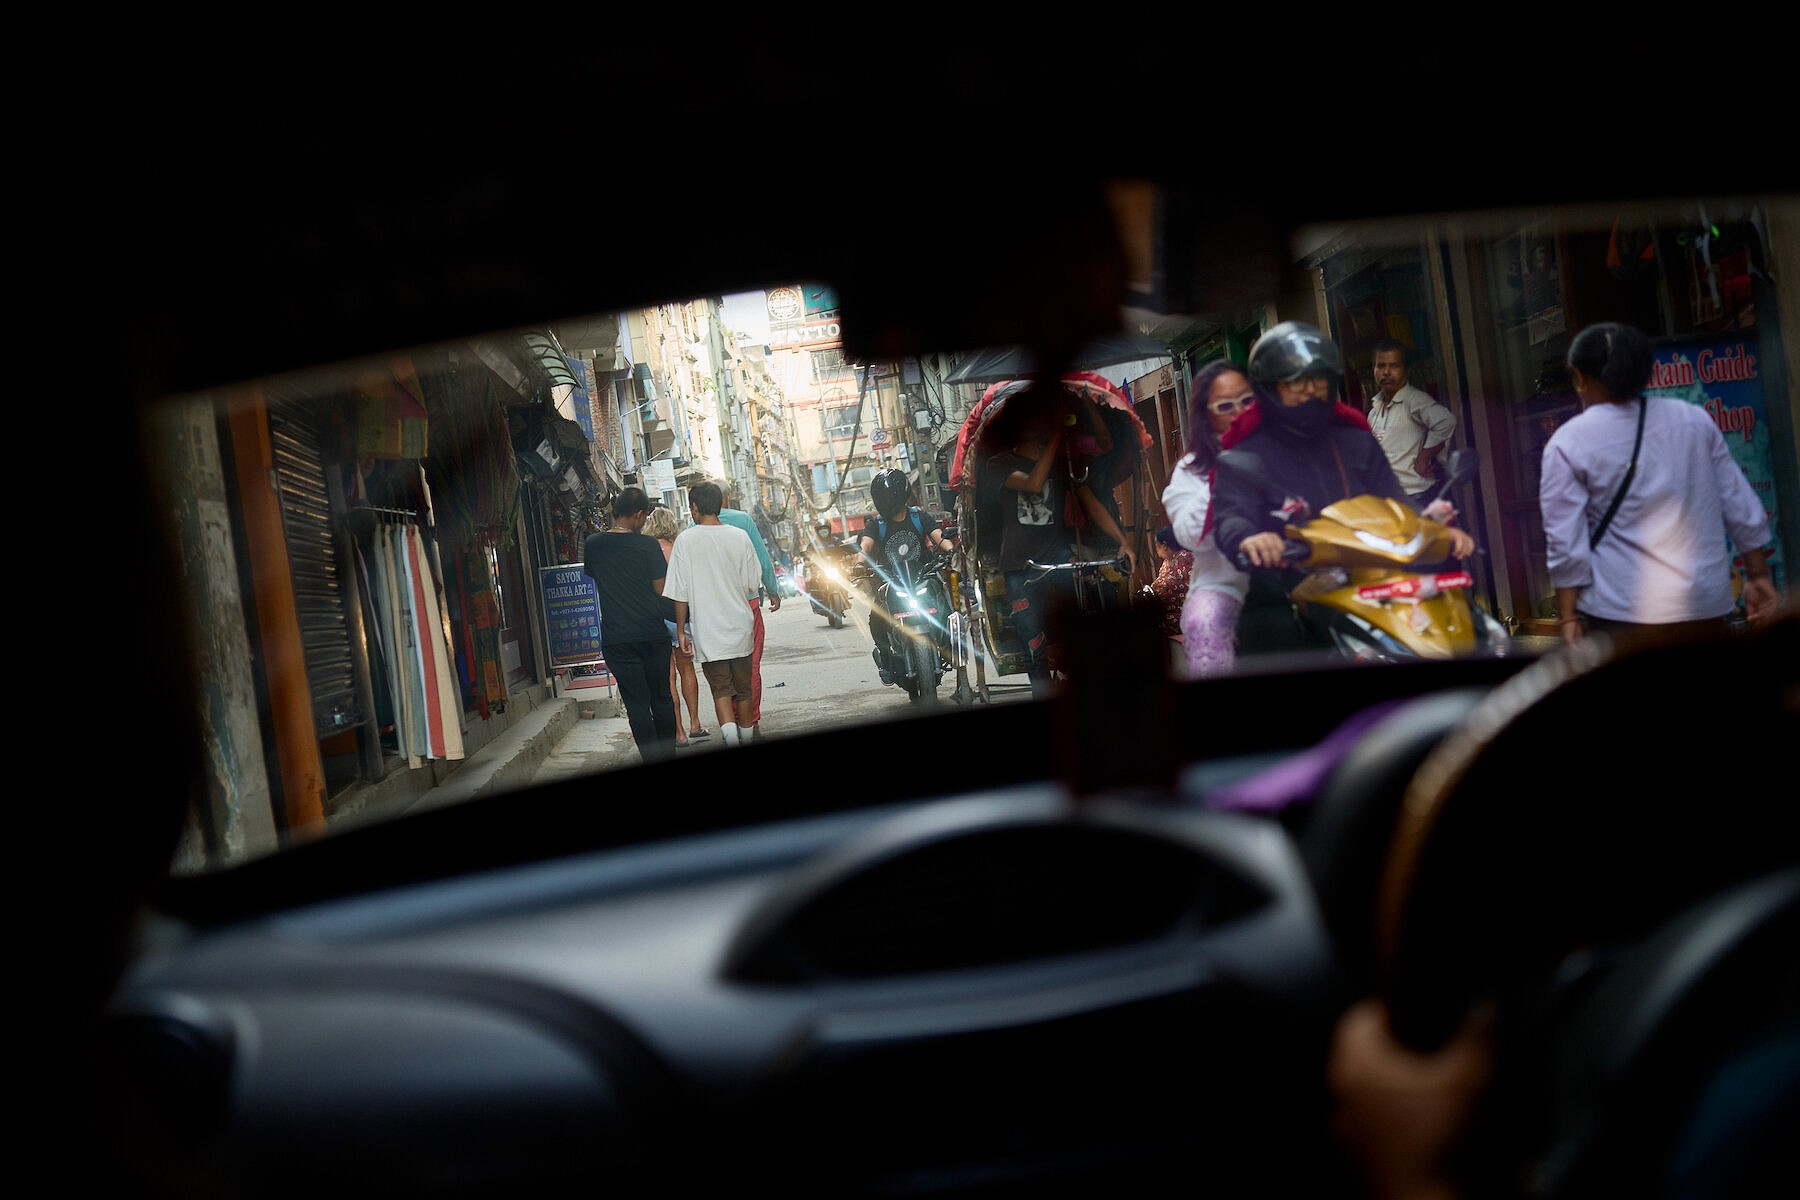 Driving through Kathmandu at the start of the trip  © Hamish Frost